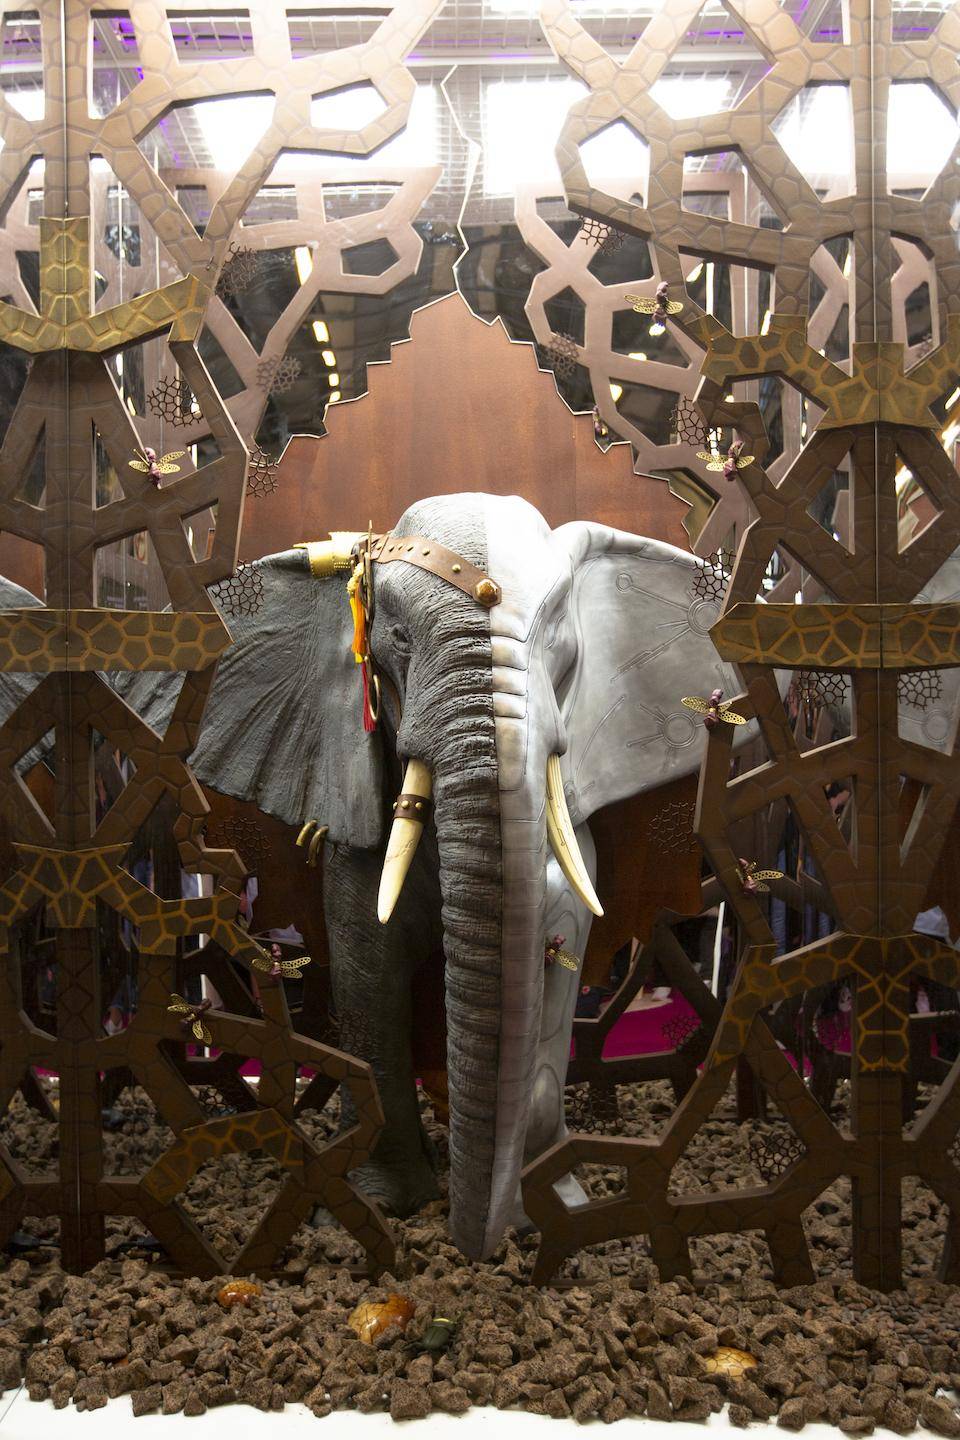 The elephant from Chef Lluc's window display